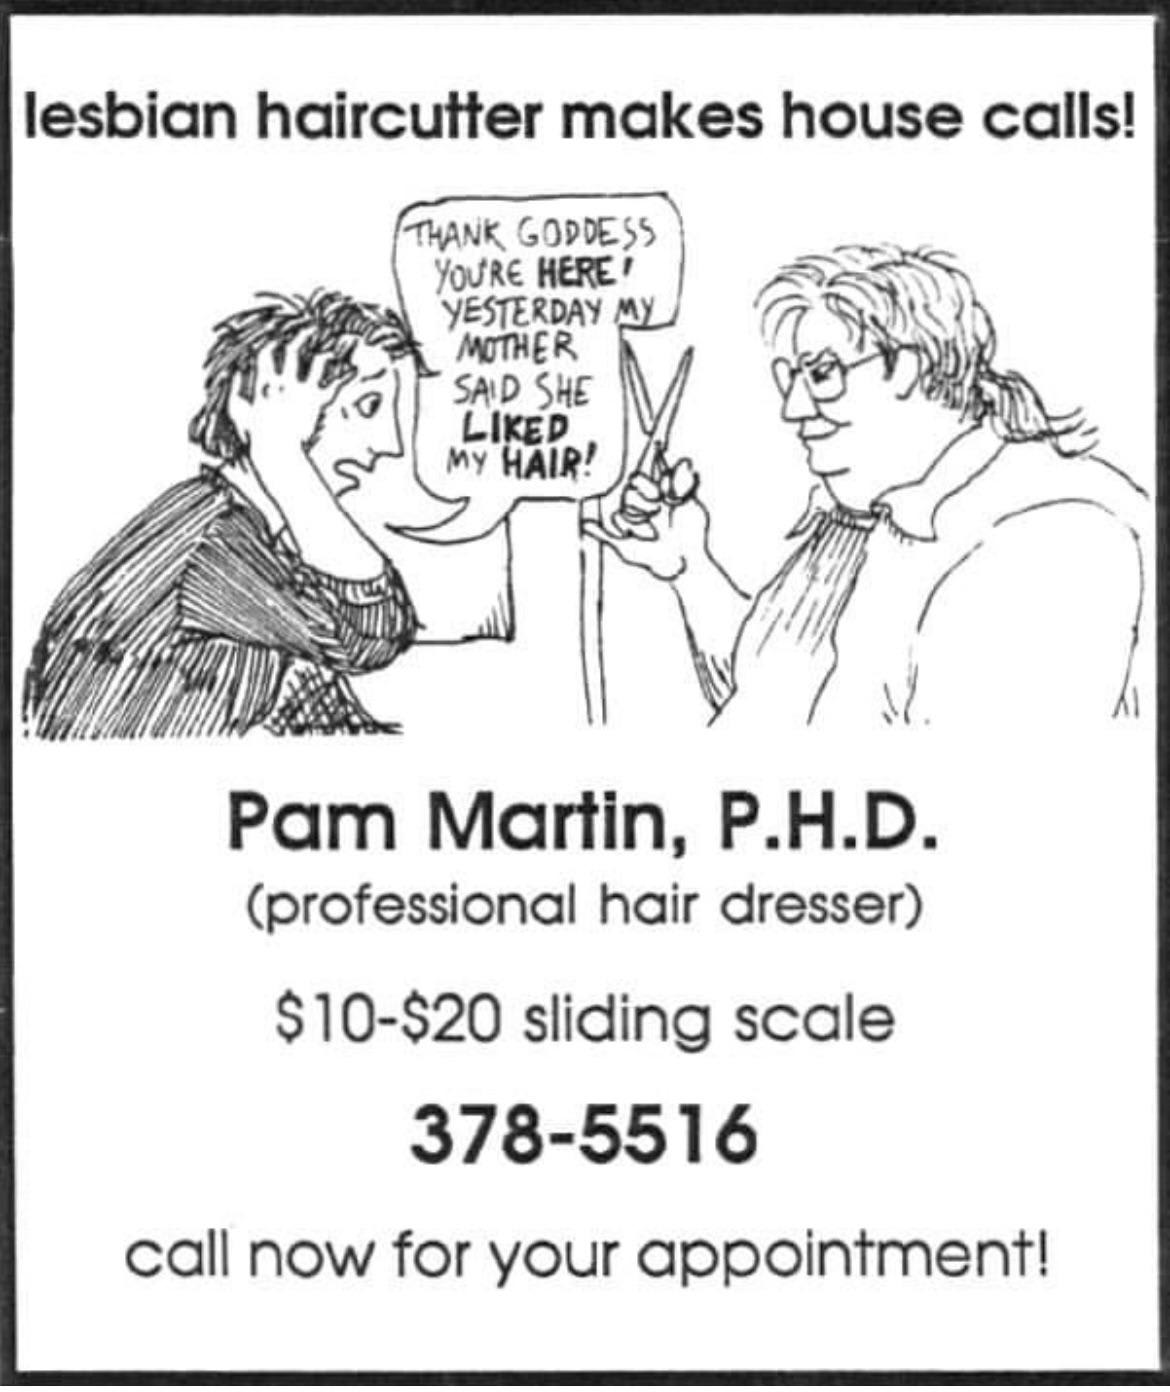 An advertisement in the newsletter of the Atlanta Lesbian Feminist Alliance, March 1988